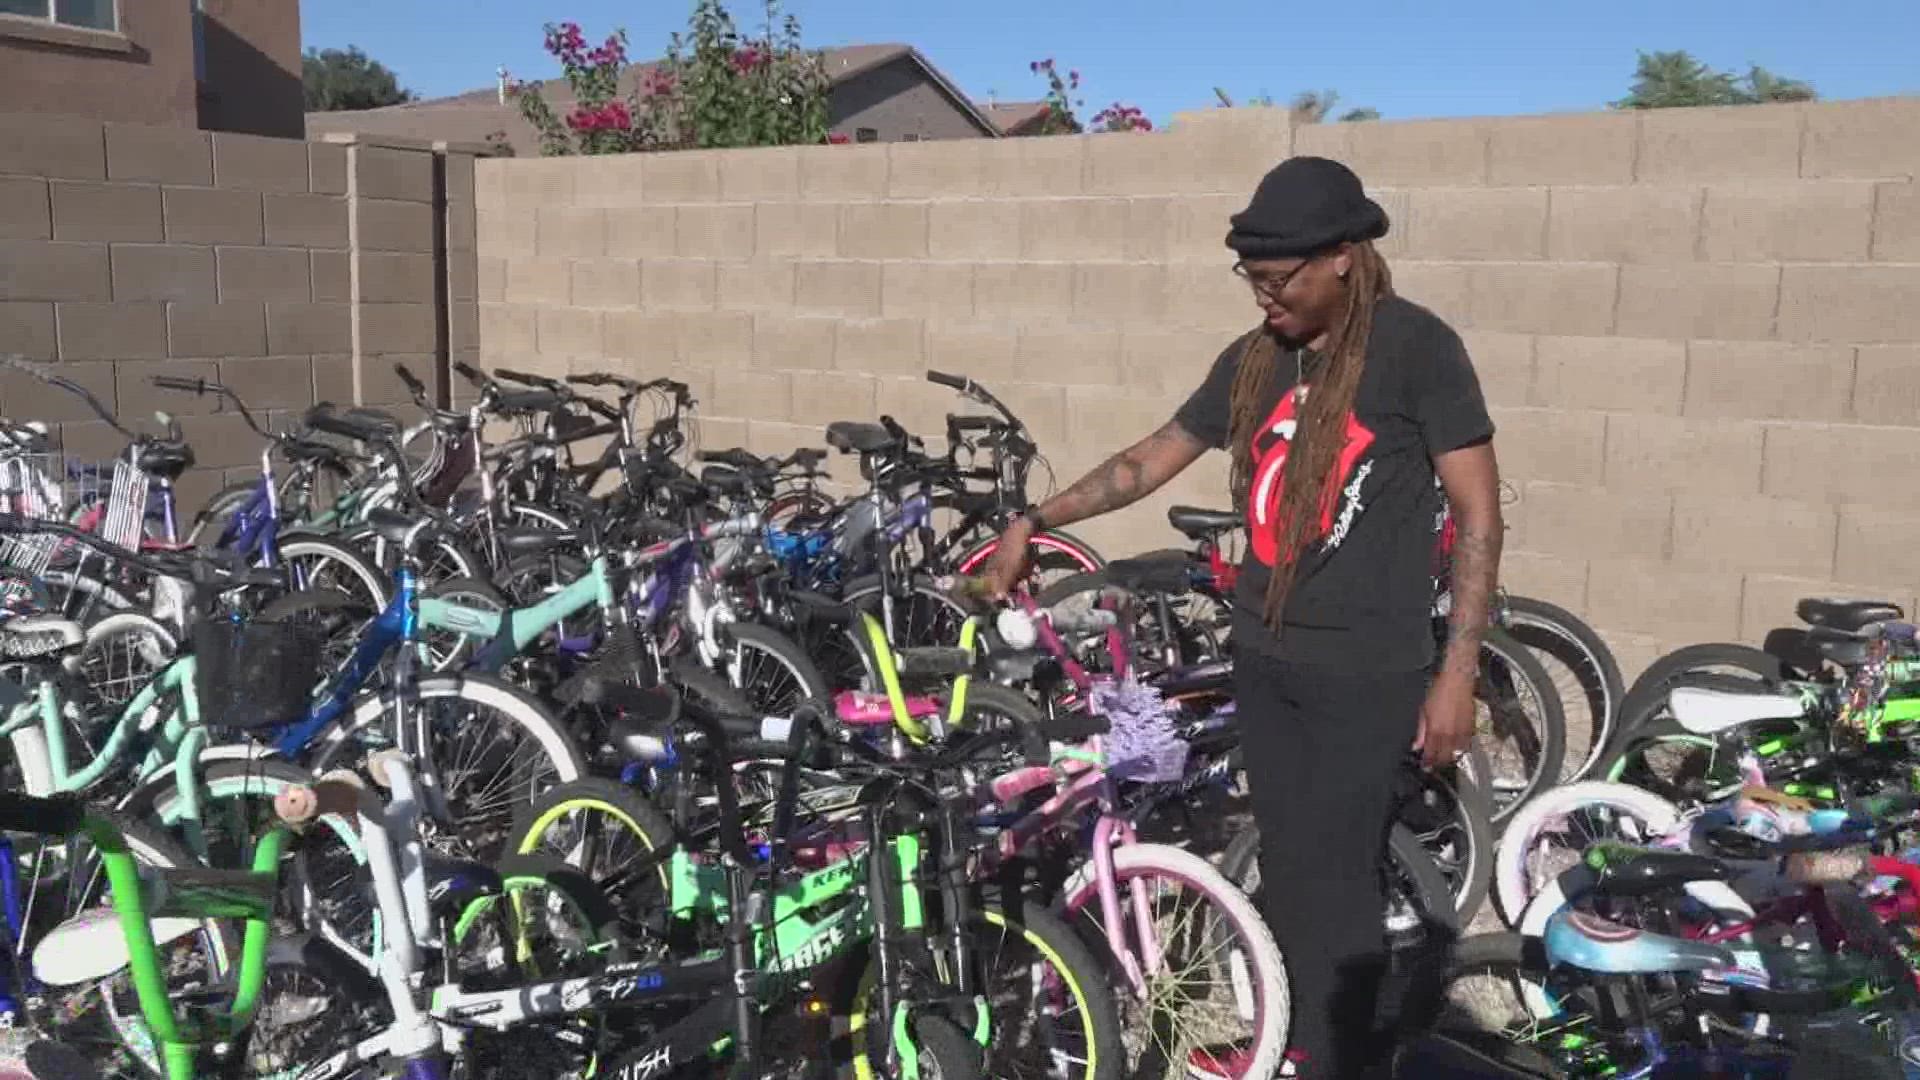 A 13-year-old girl's bike was stolen from a school in August. The community showed an outpouring of support with donations.